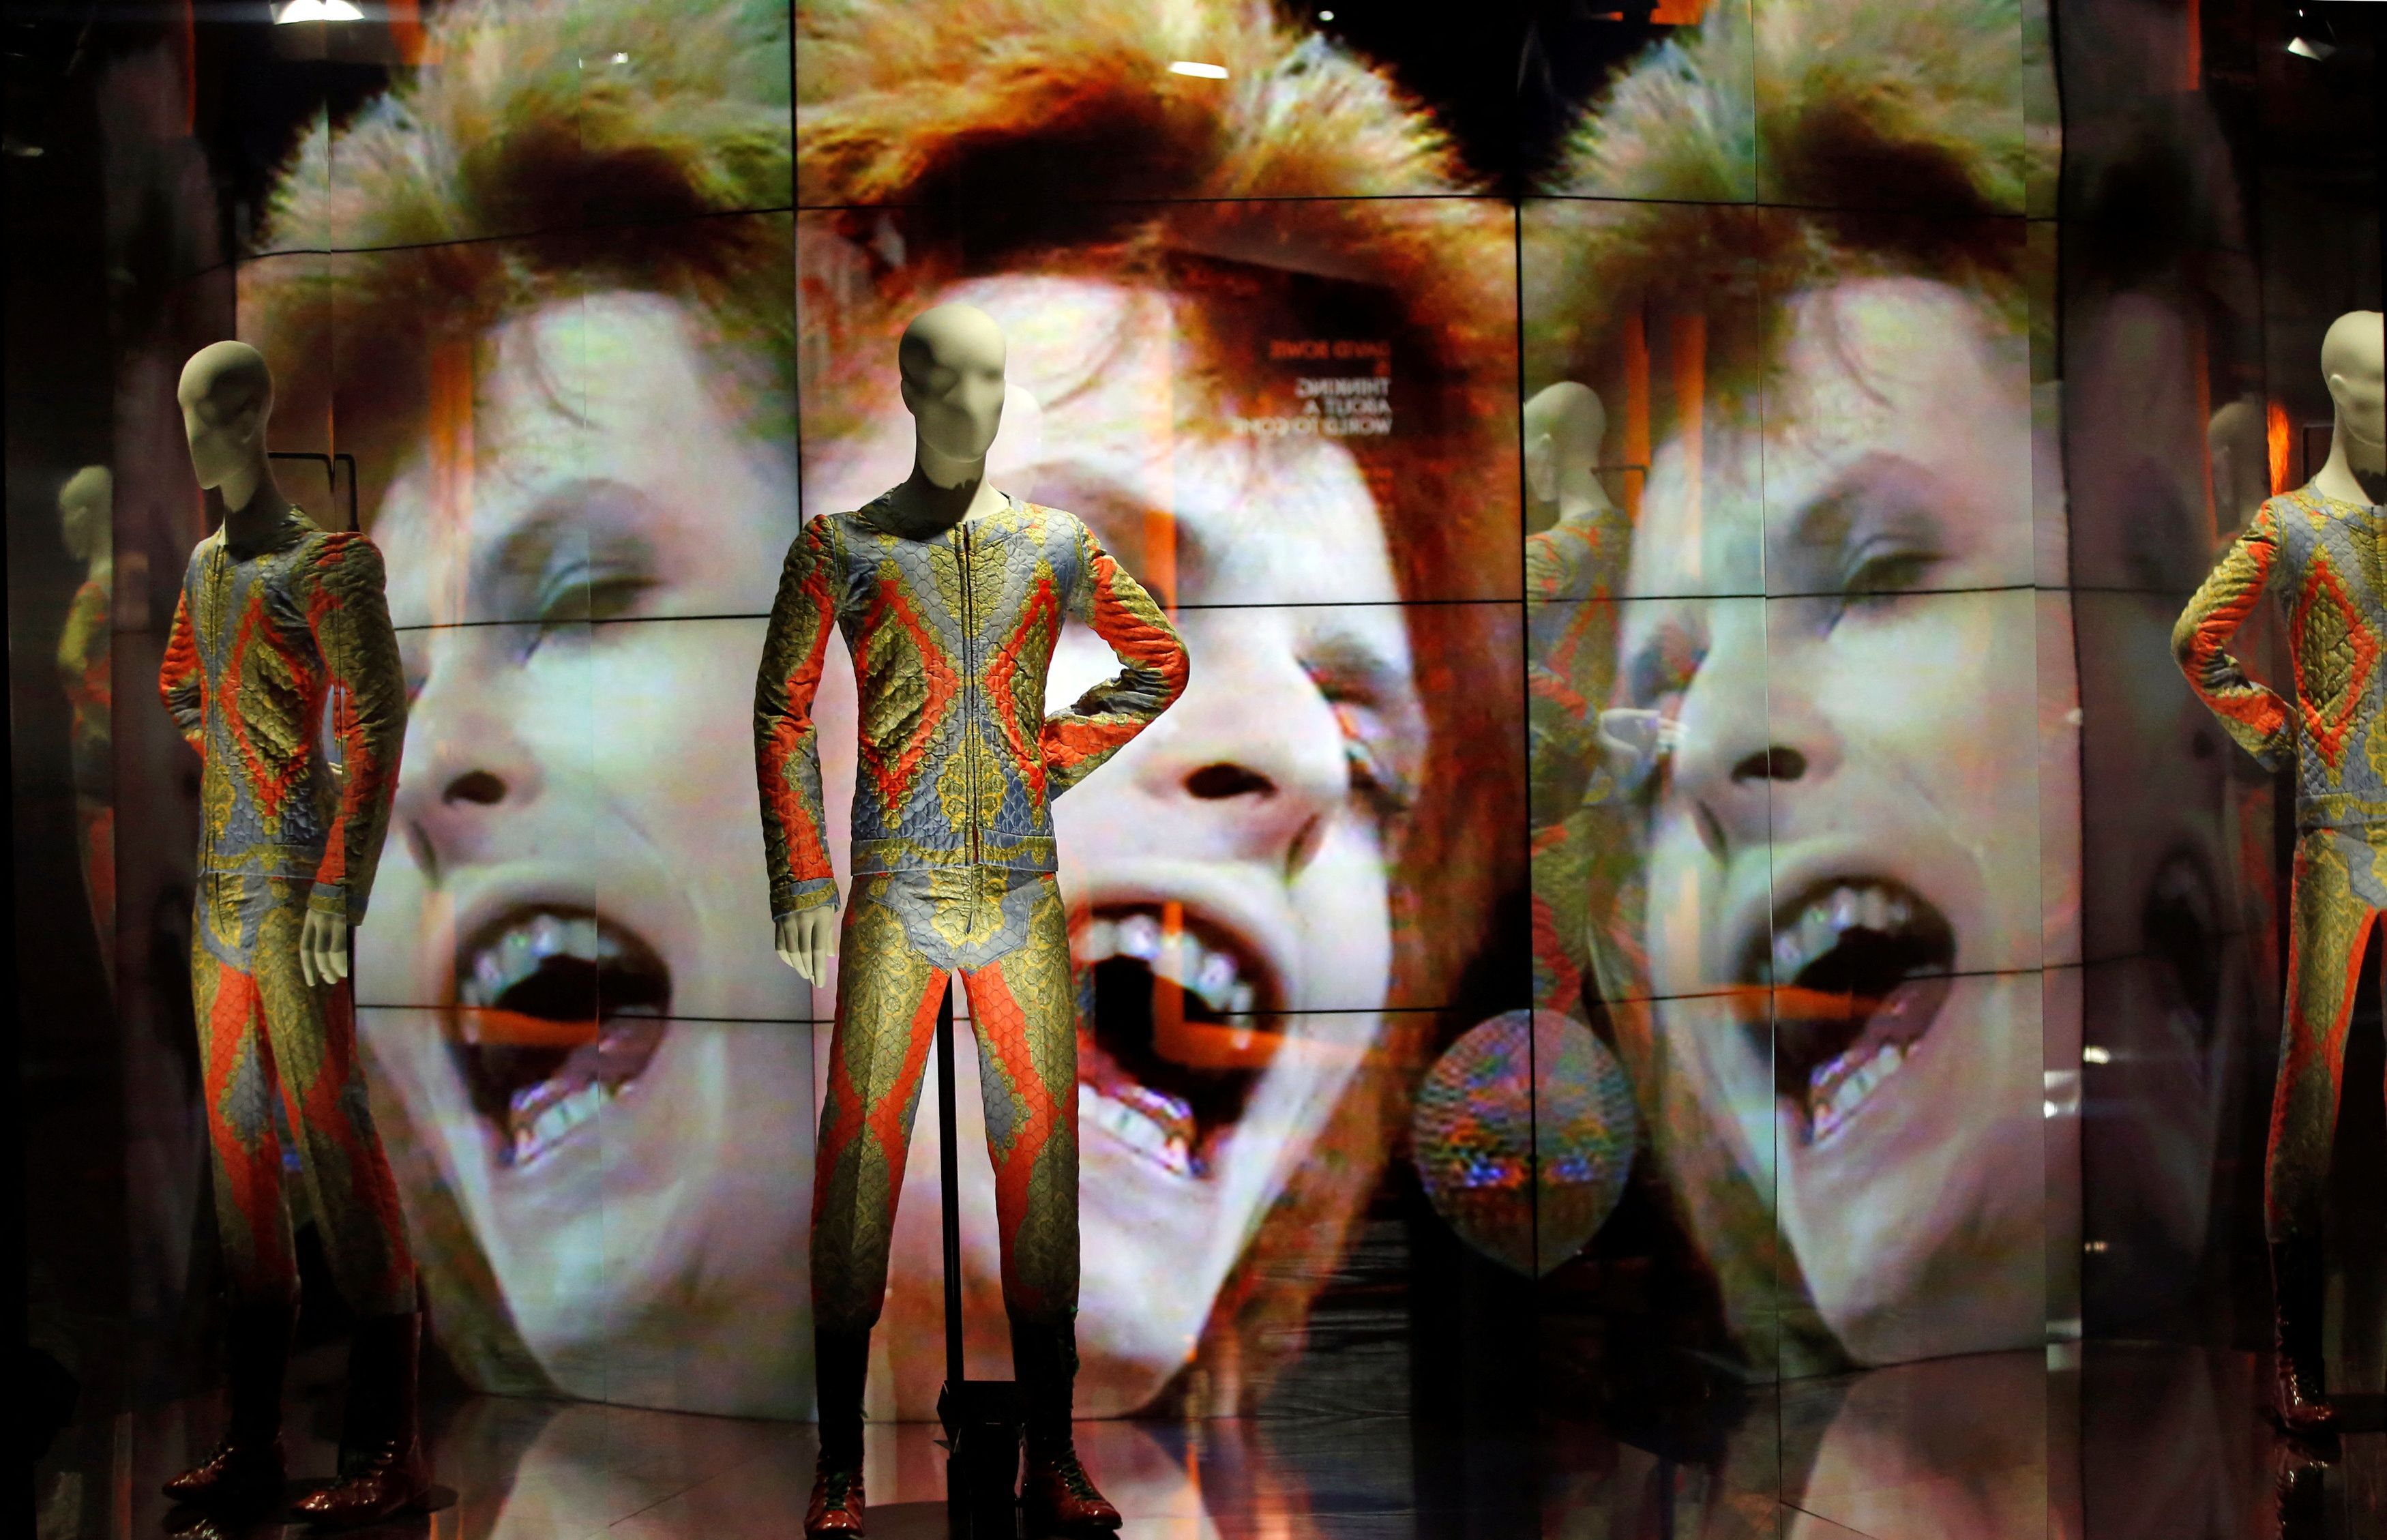 Two suits designed by Freddie Burretti (1972) for the Ziggy Stardust tour are displayed in front of a video showing pop star David Bowie singing at the BBC show Top of the Pops (July 1972) as part of the exhibition 